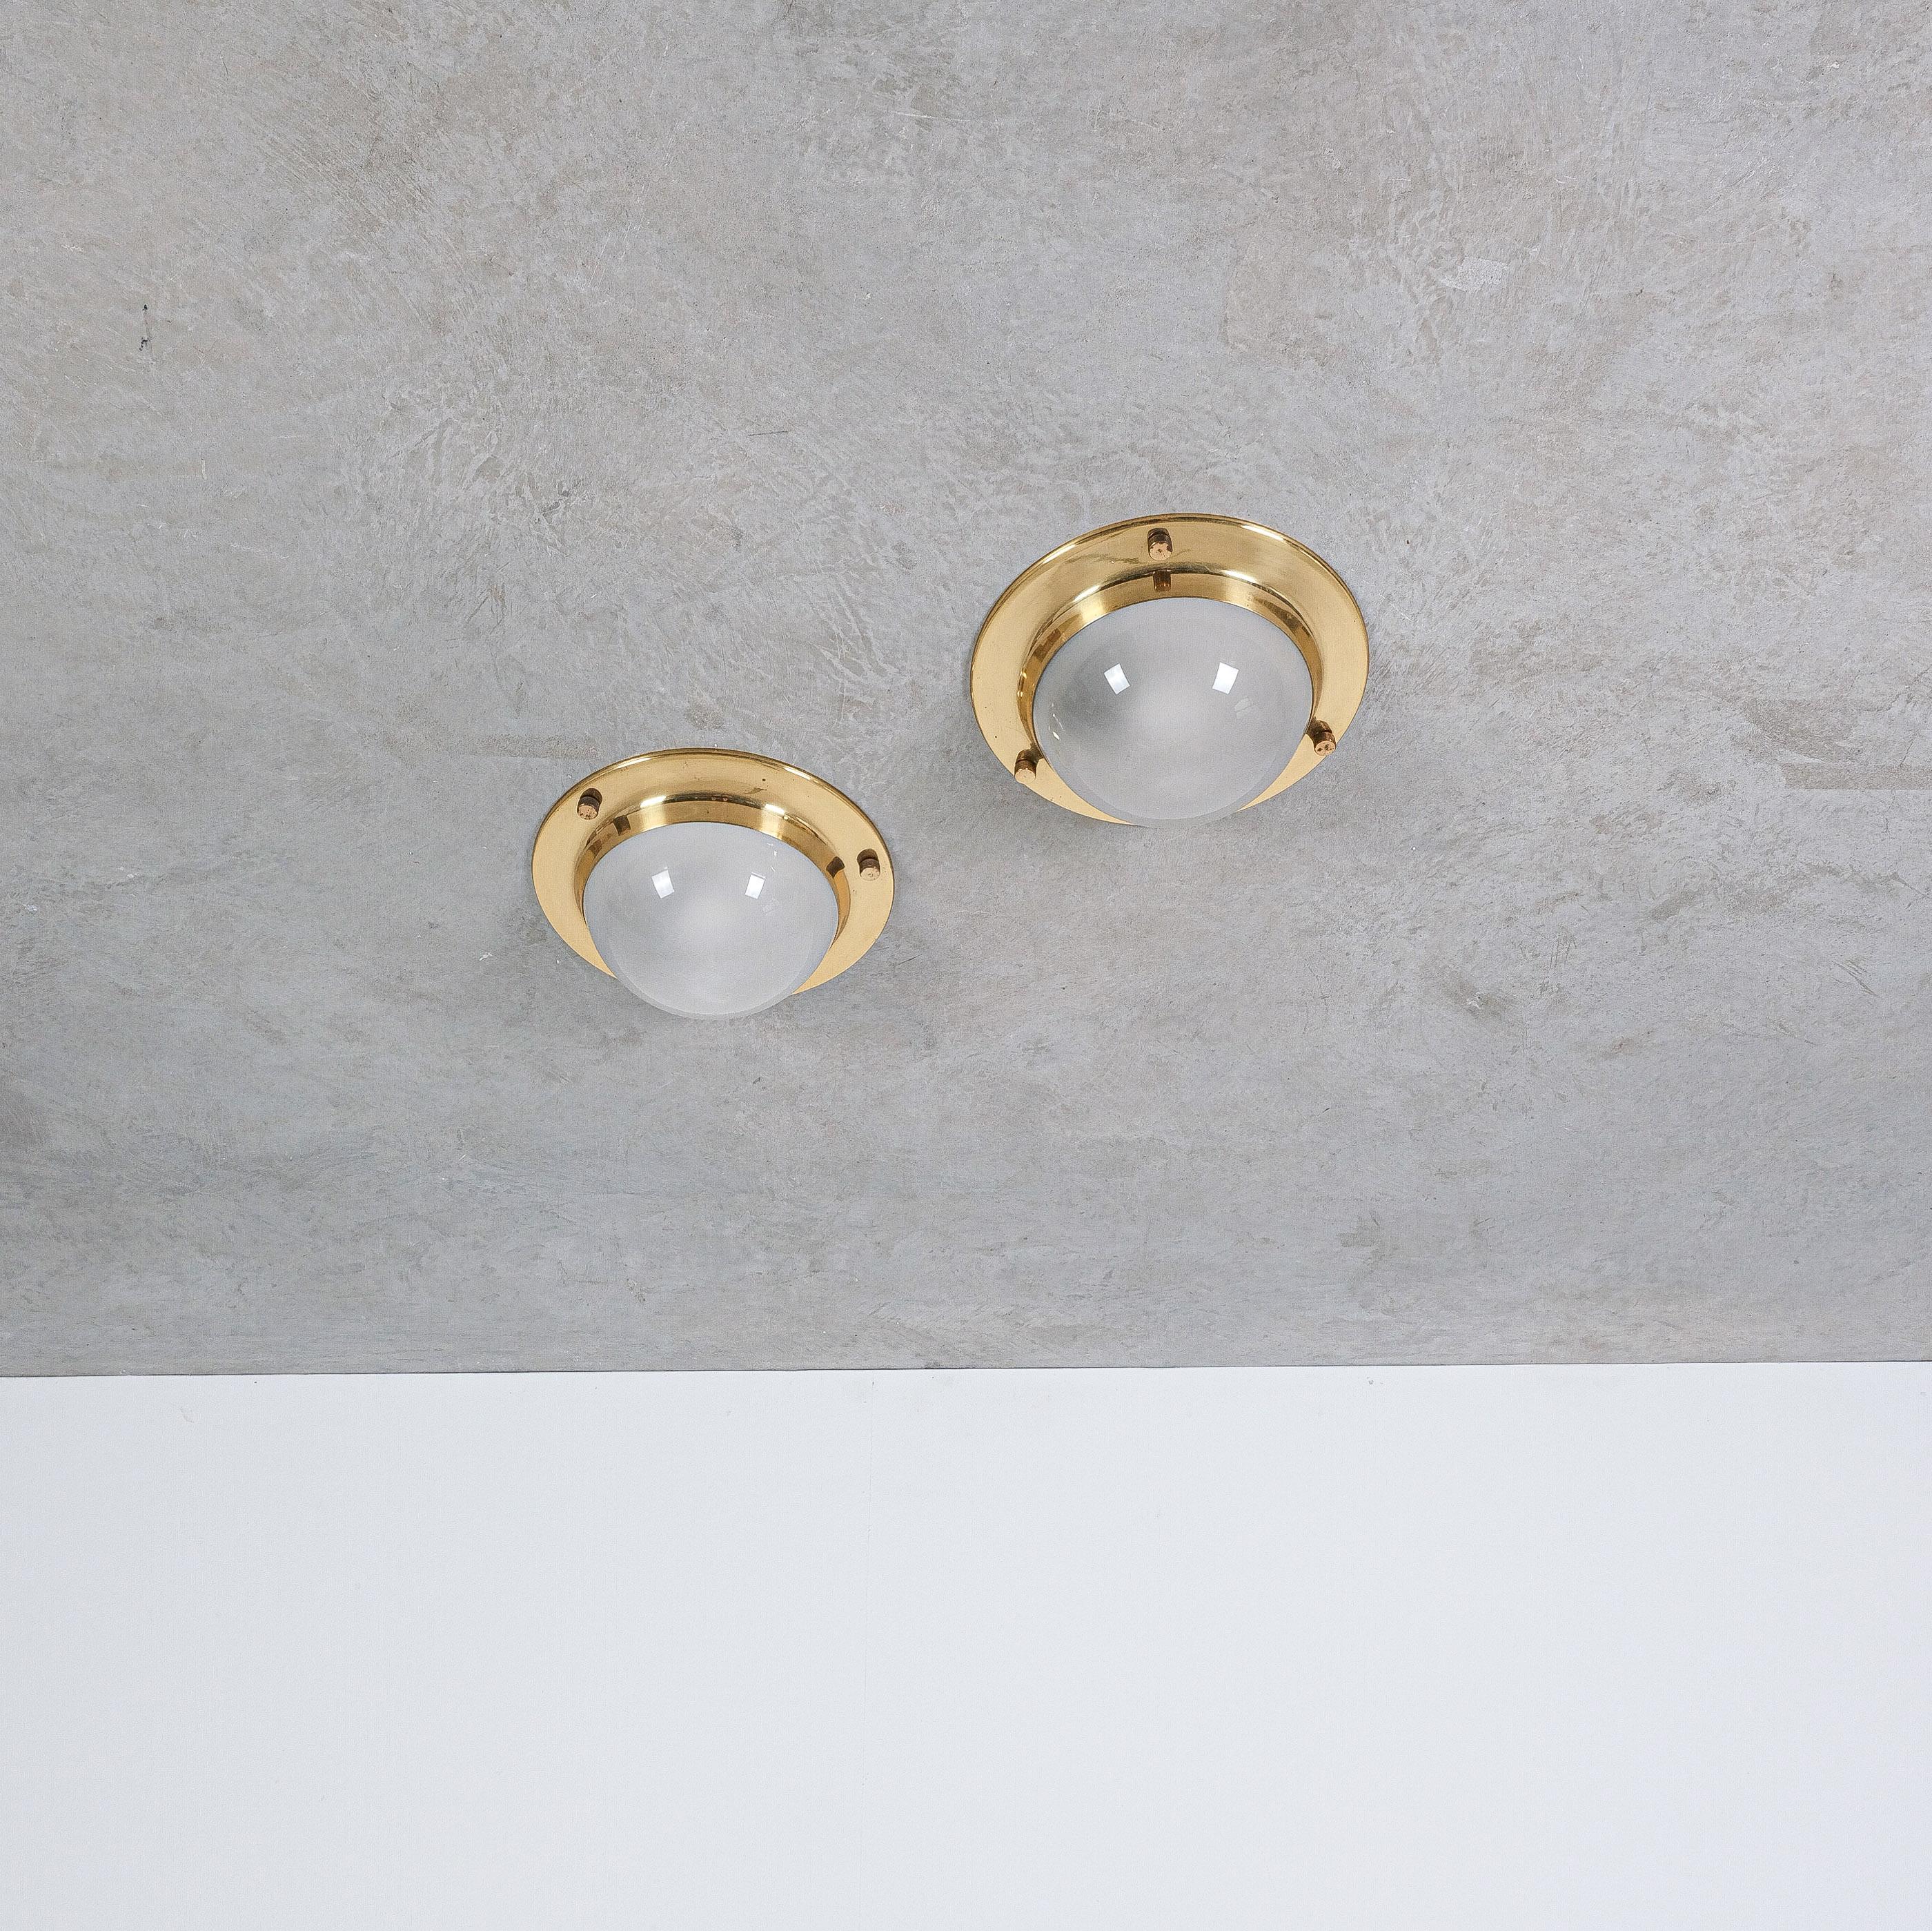 Luigi Caccia Dominioni Flush Mounts For Azucena, circa 1960 midcentury
4x pieces available in identical golden brass patina and glass domes.
Sold and priced individually. Dimensions: 13.97